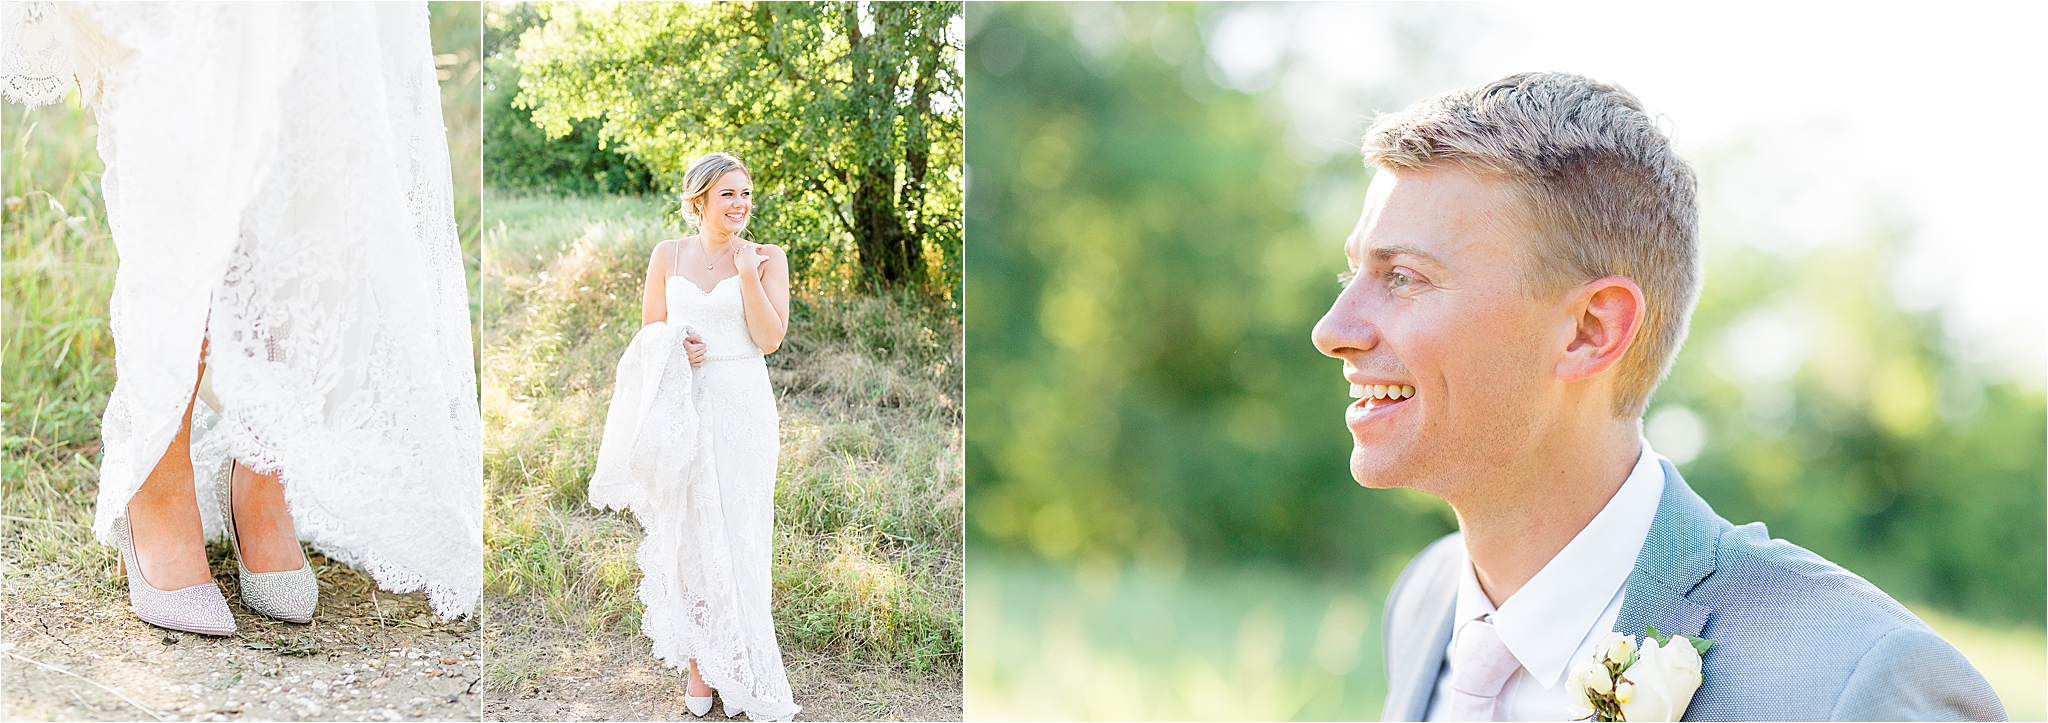 Bride and Groom Portraits at Arbor Hills Nature Preserve in Plano, Texas 